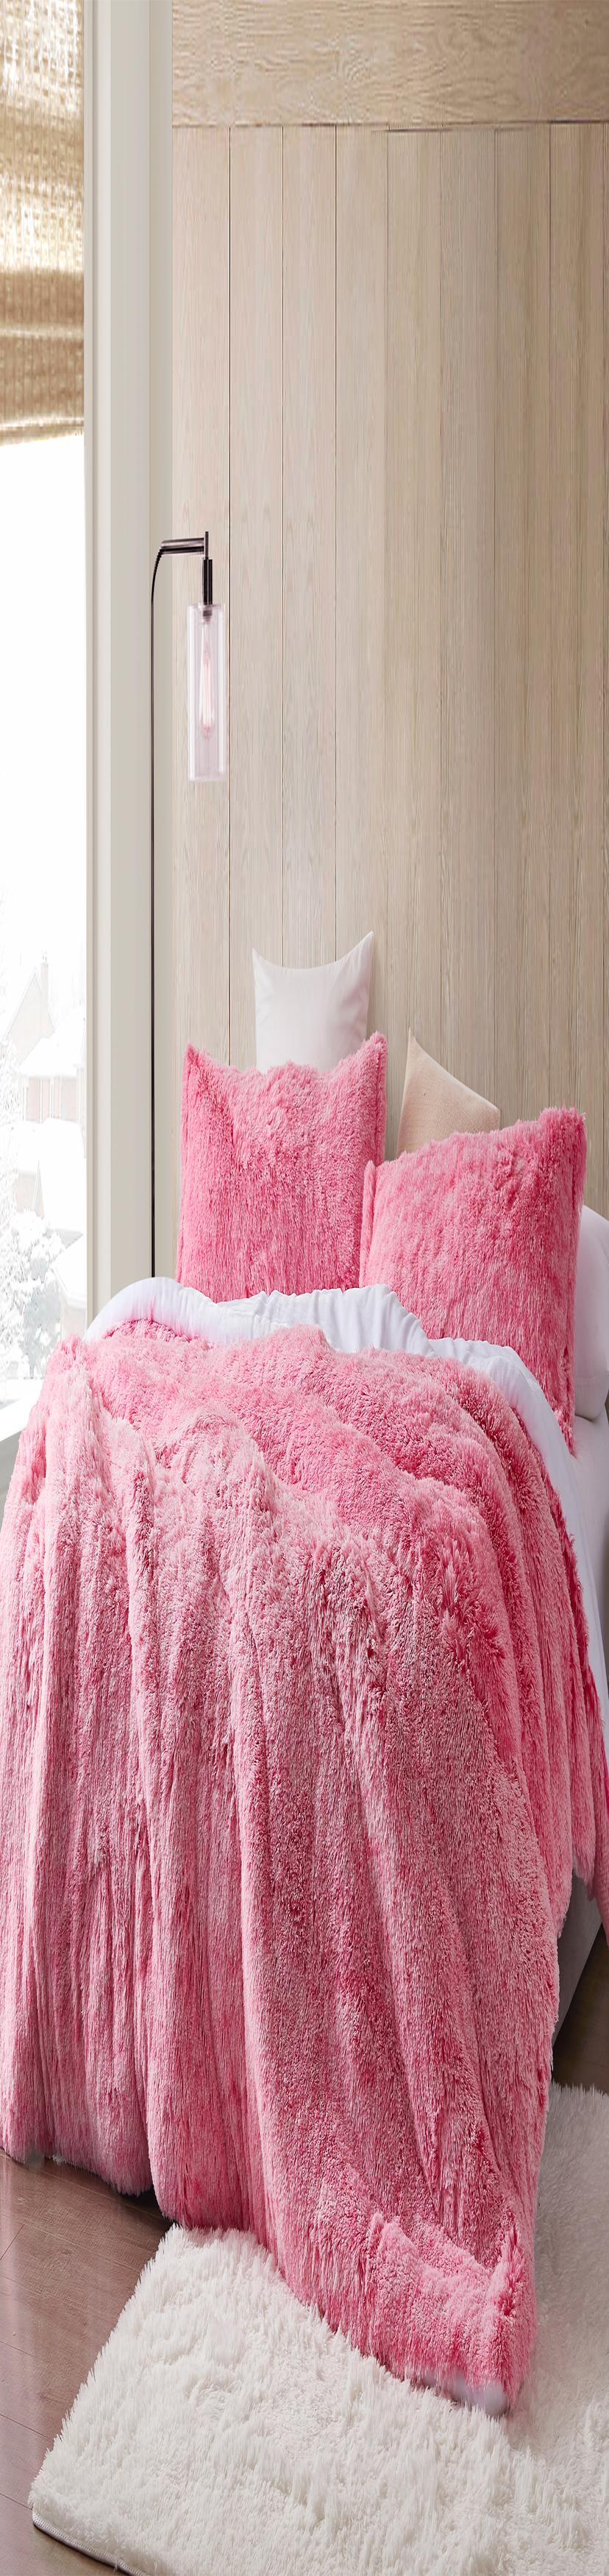 Are You Kidding - Coma Inducer® Oversized Comforter - Frosted Intensity Pink